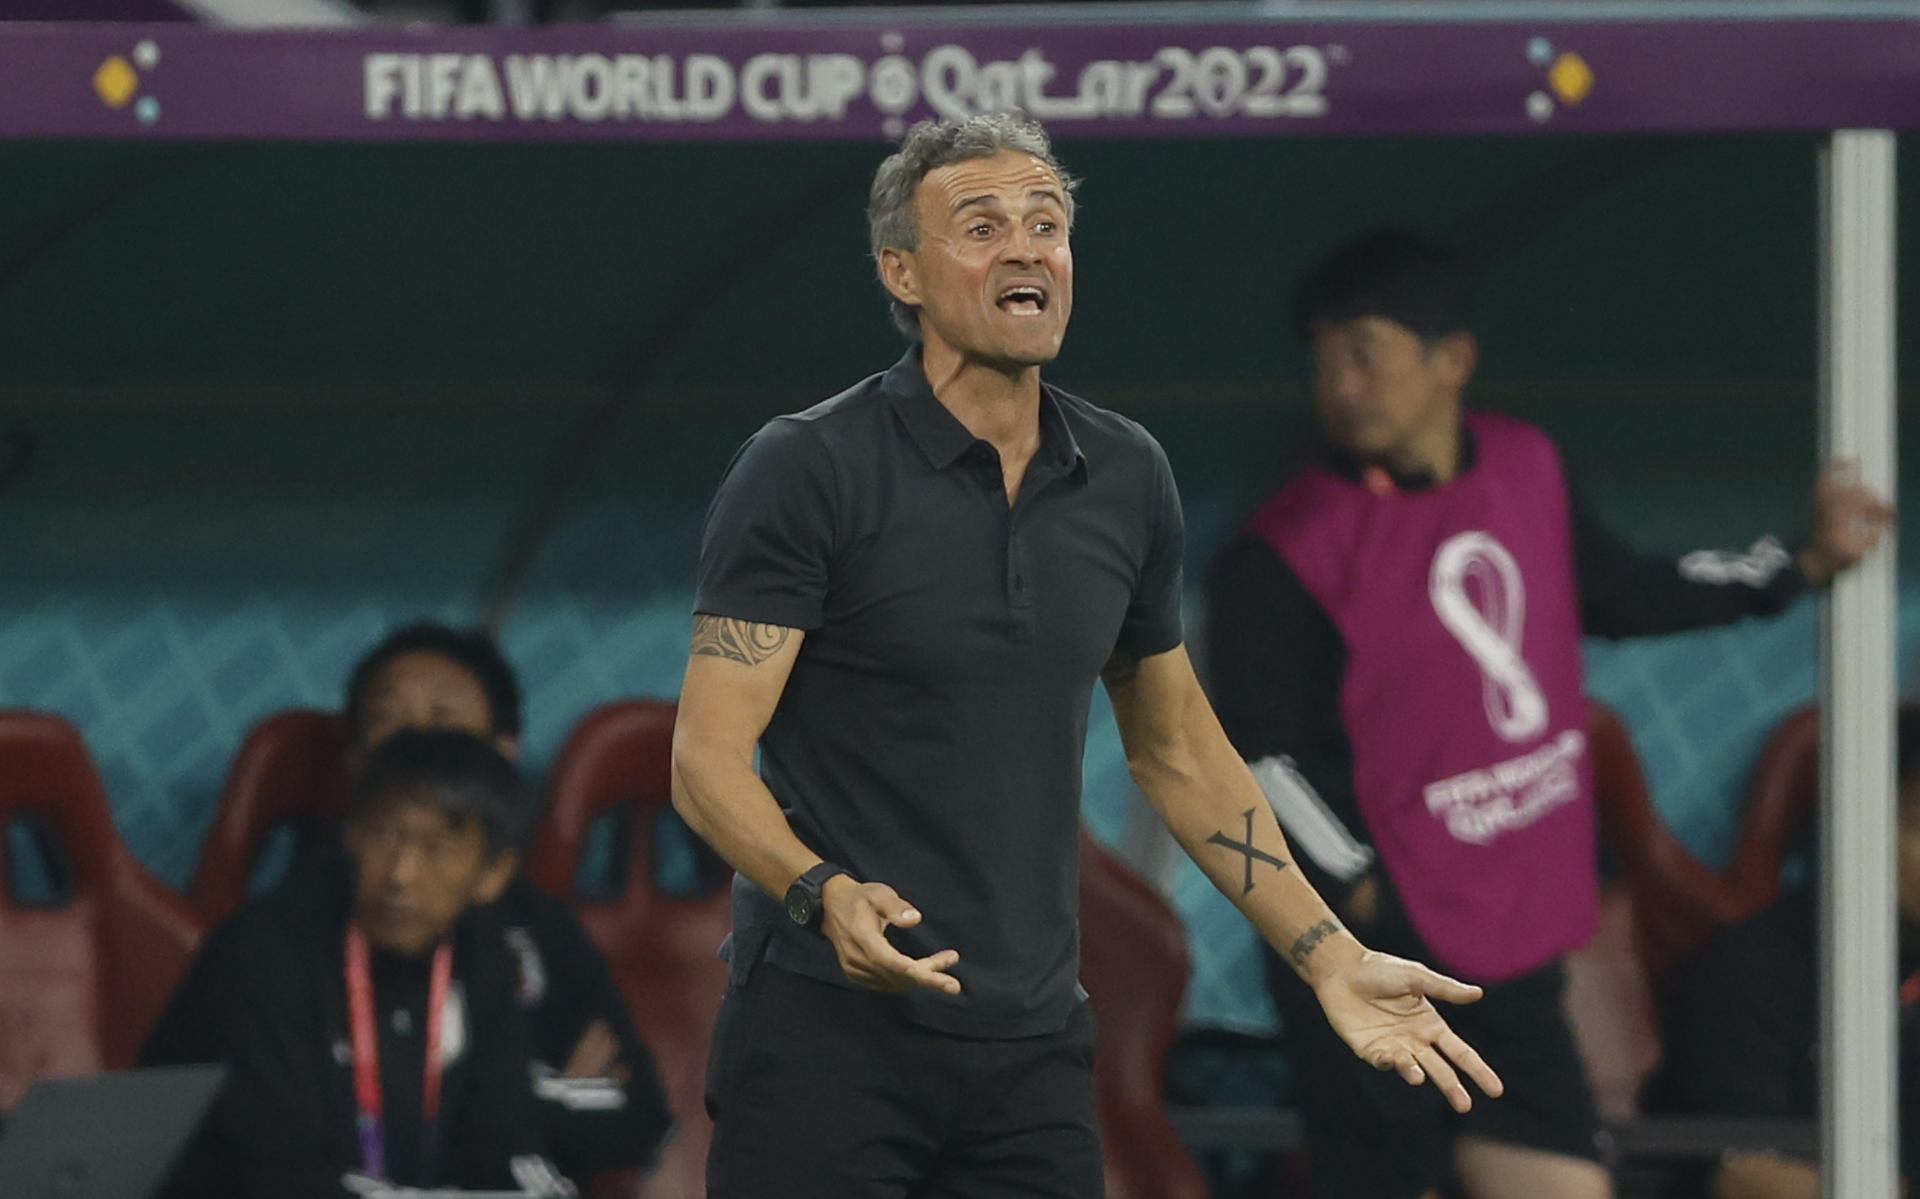 Luis Enrique during the match between Spain and Japan in the World Cup in Qatar.